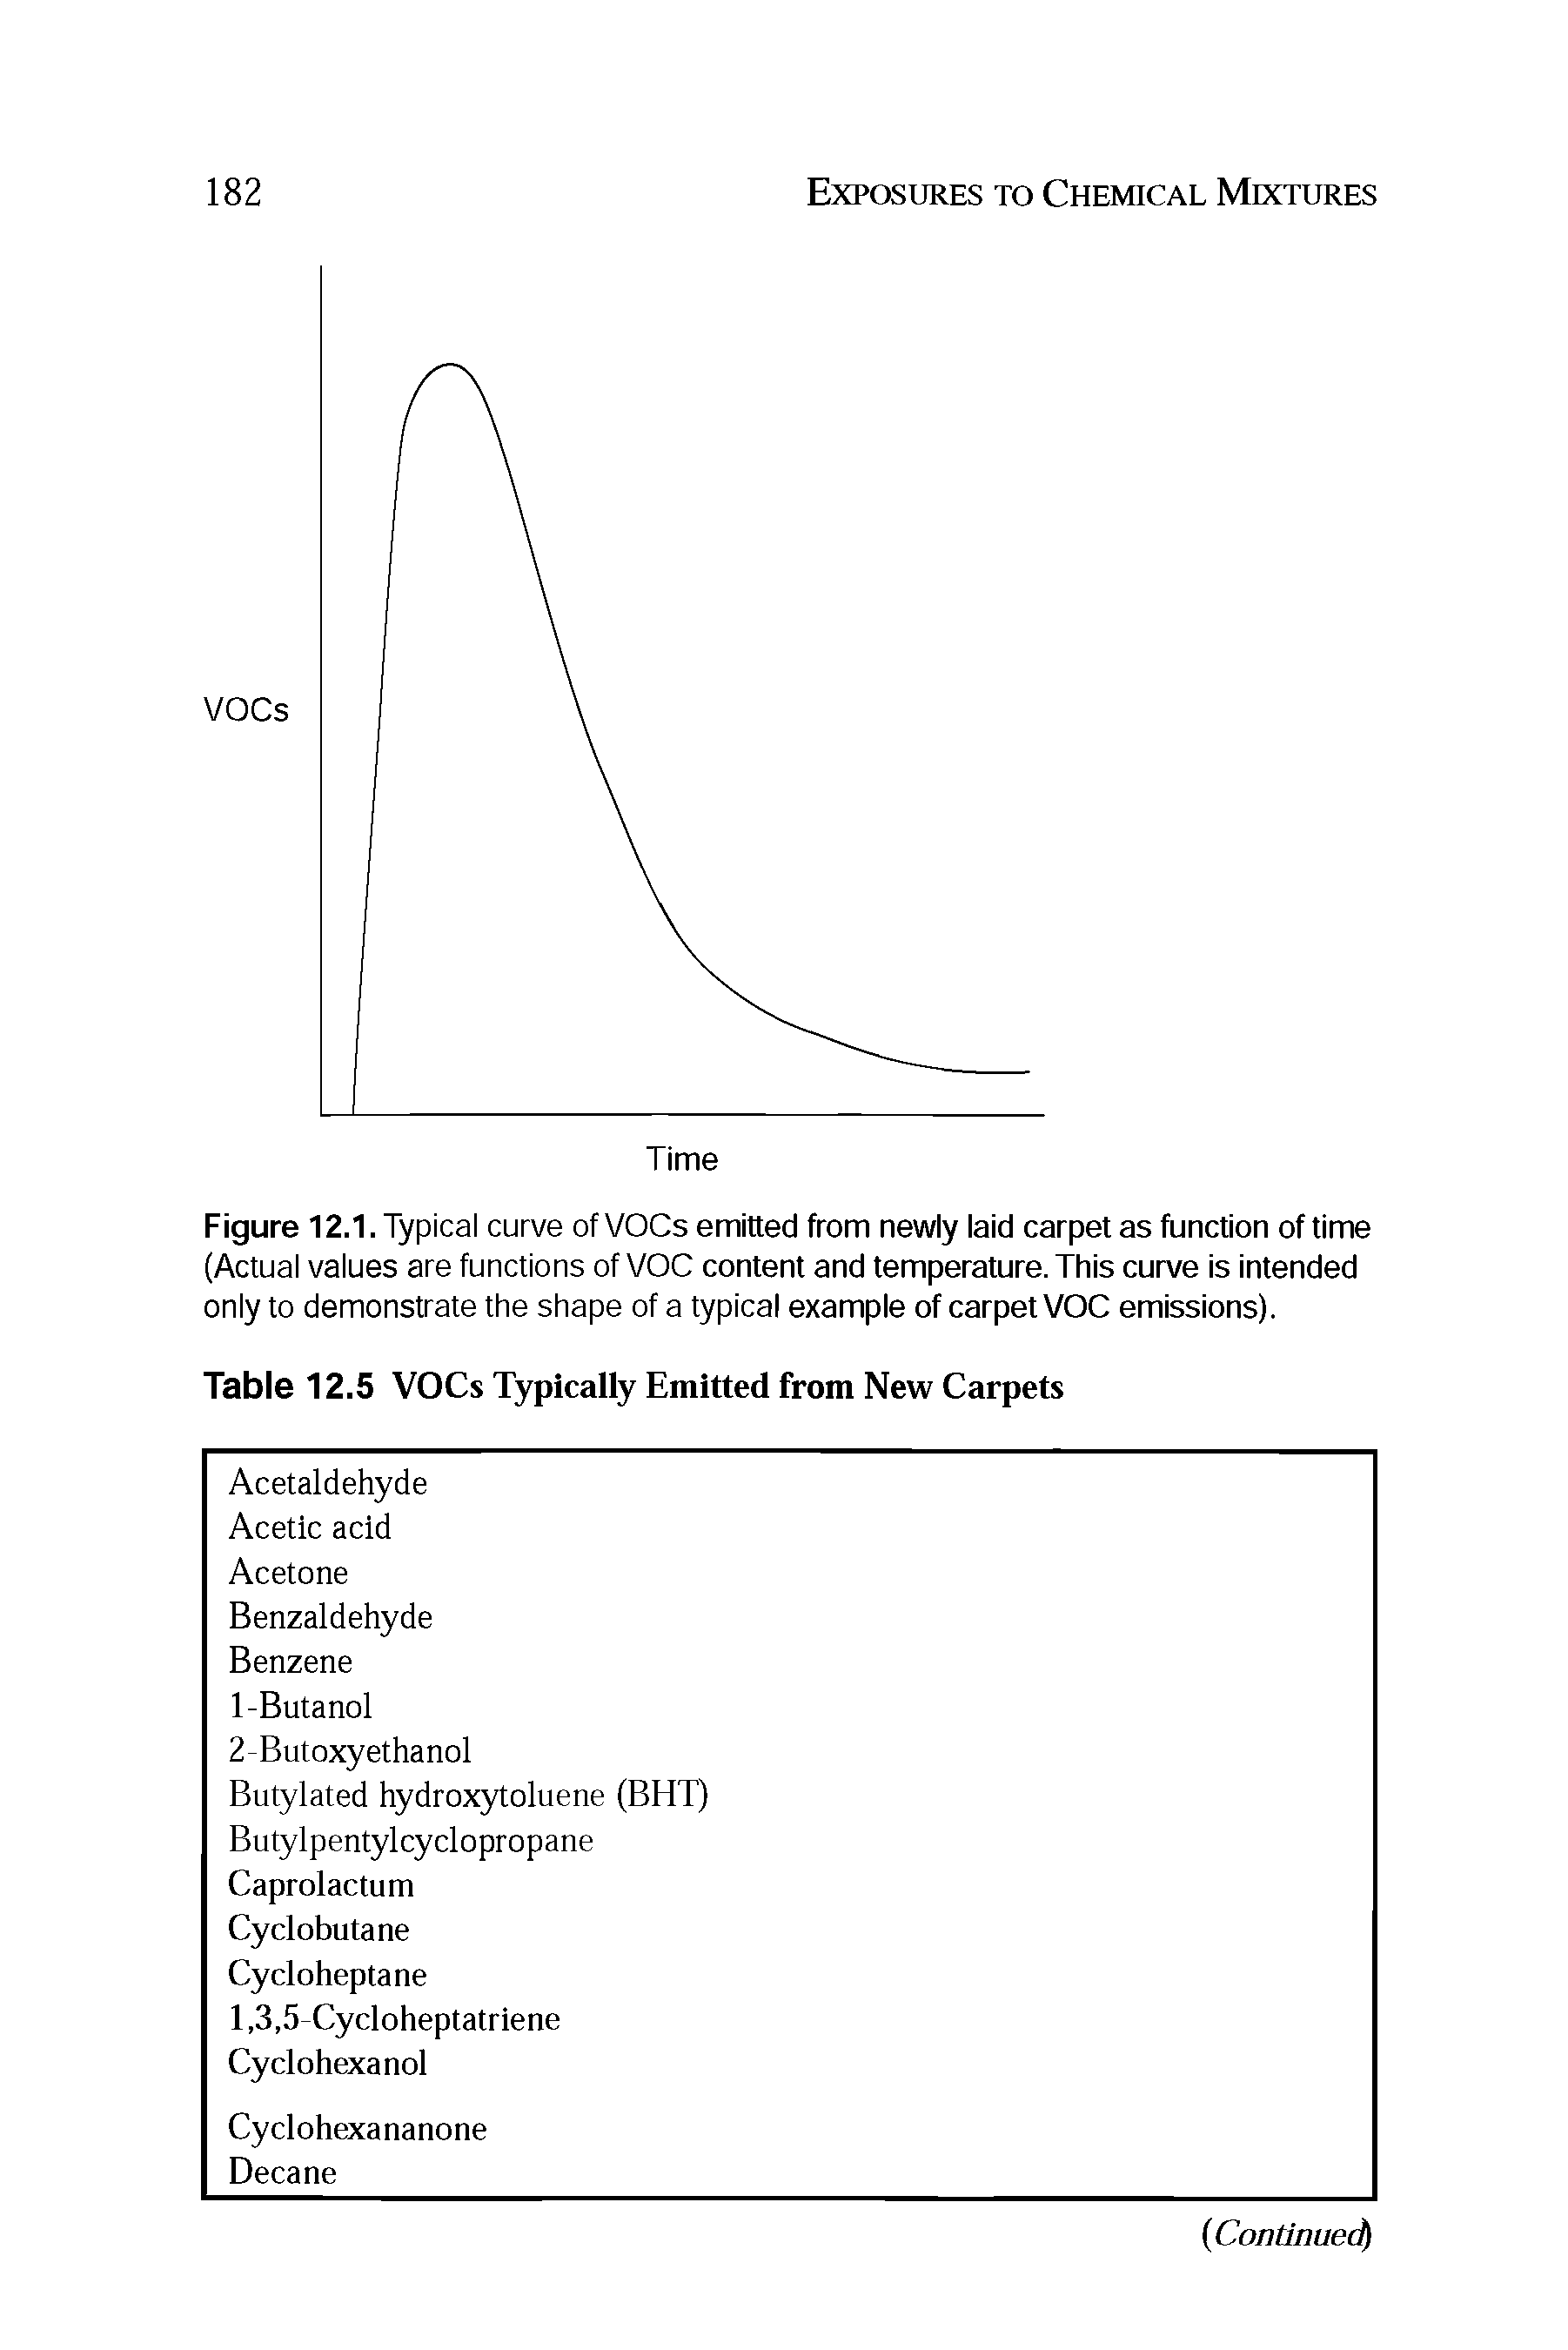 Figure 12.1. Typical curve of VOCs emitted from newly laid carpet as function of time (Actual values are functions of VOC content and temperature. This curve is intended only to demonstrate the shape of a typical example of carpet VOC emissions).